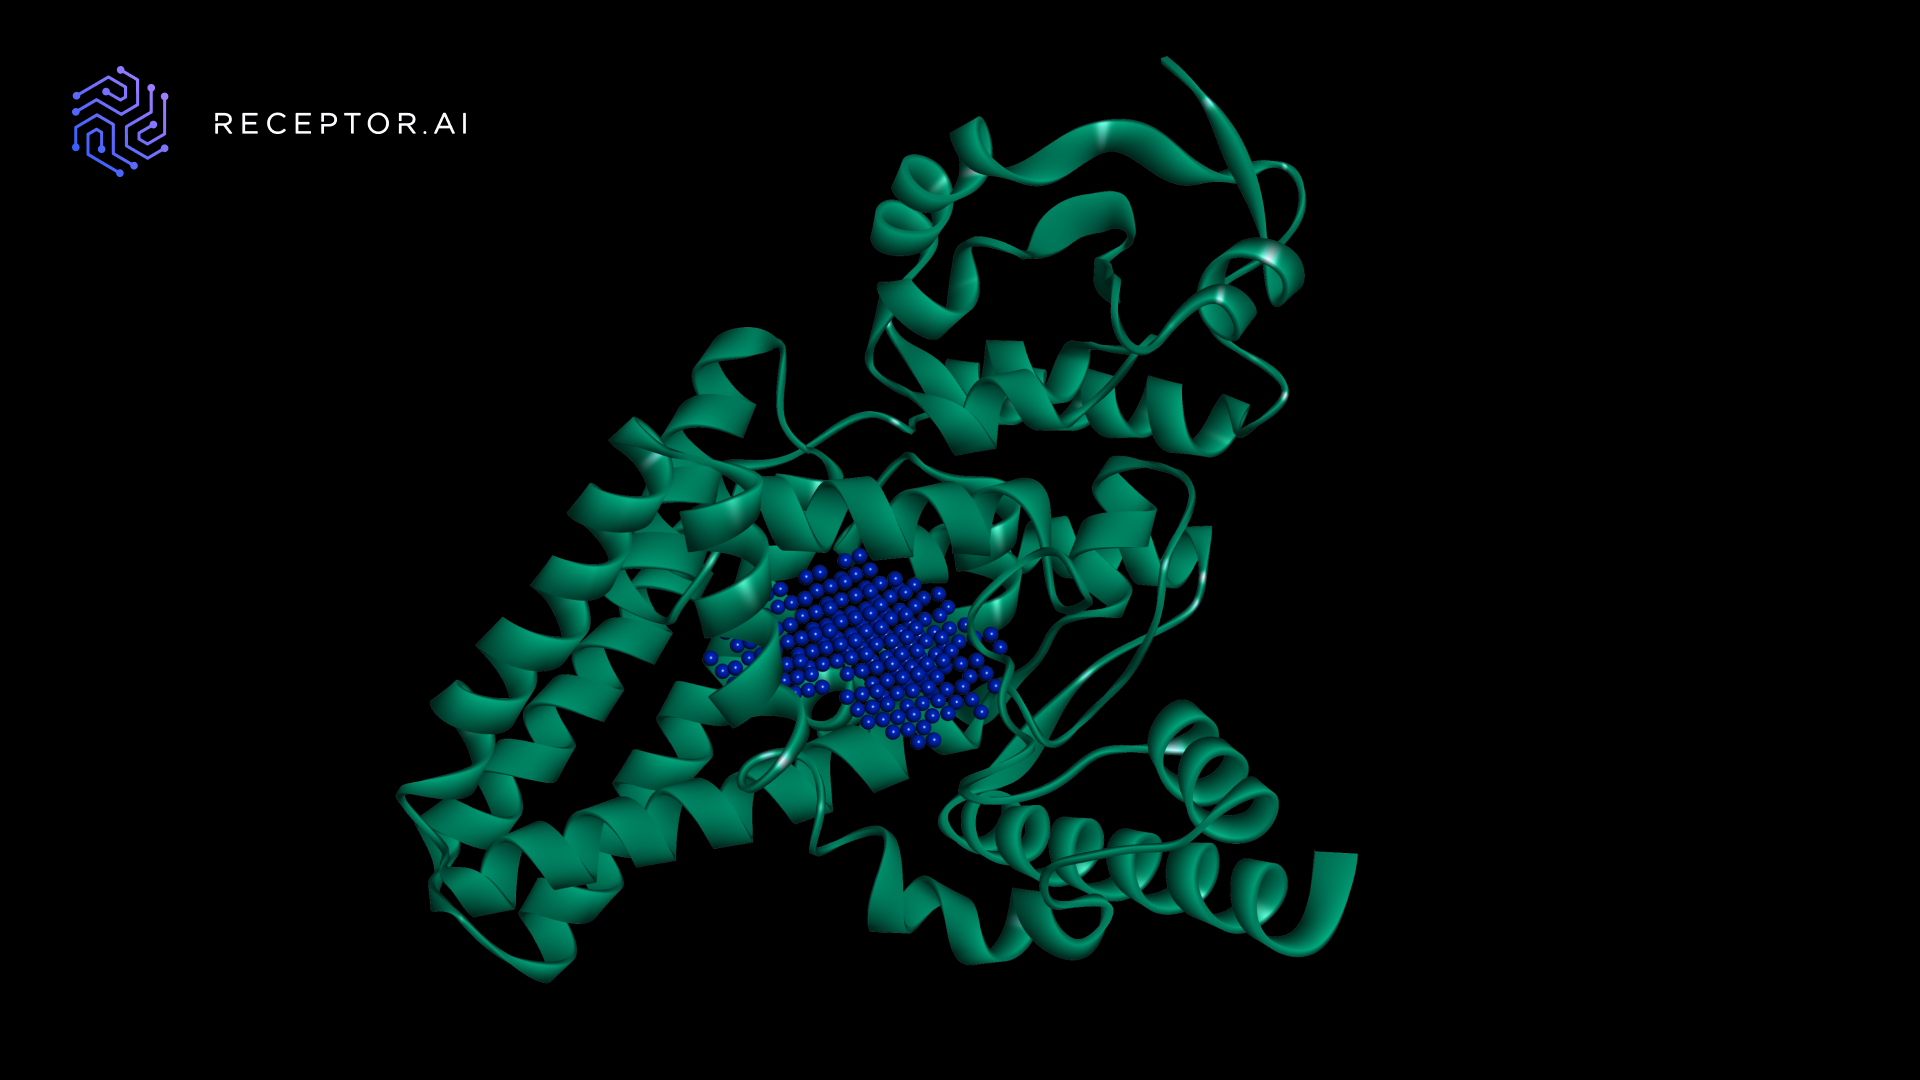 Model of the predicted 3D structure of FADS1 with the binding pocket location in the middle in blue.
